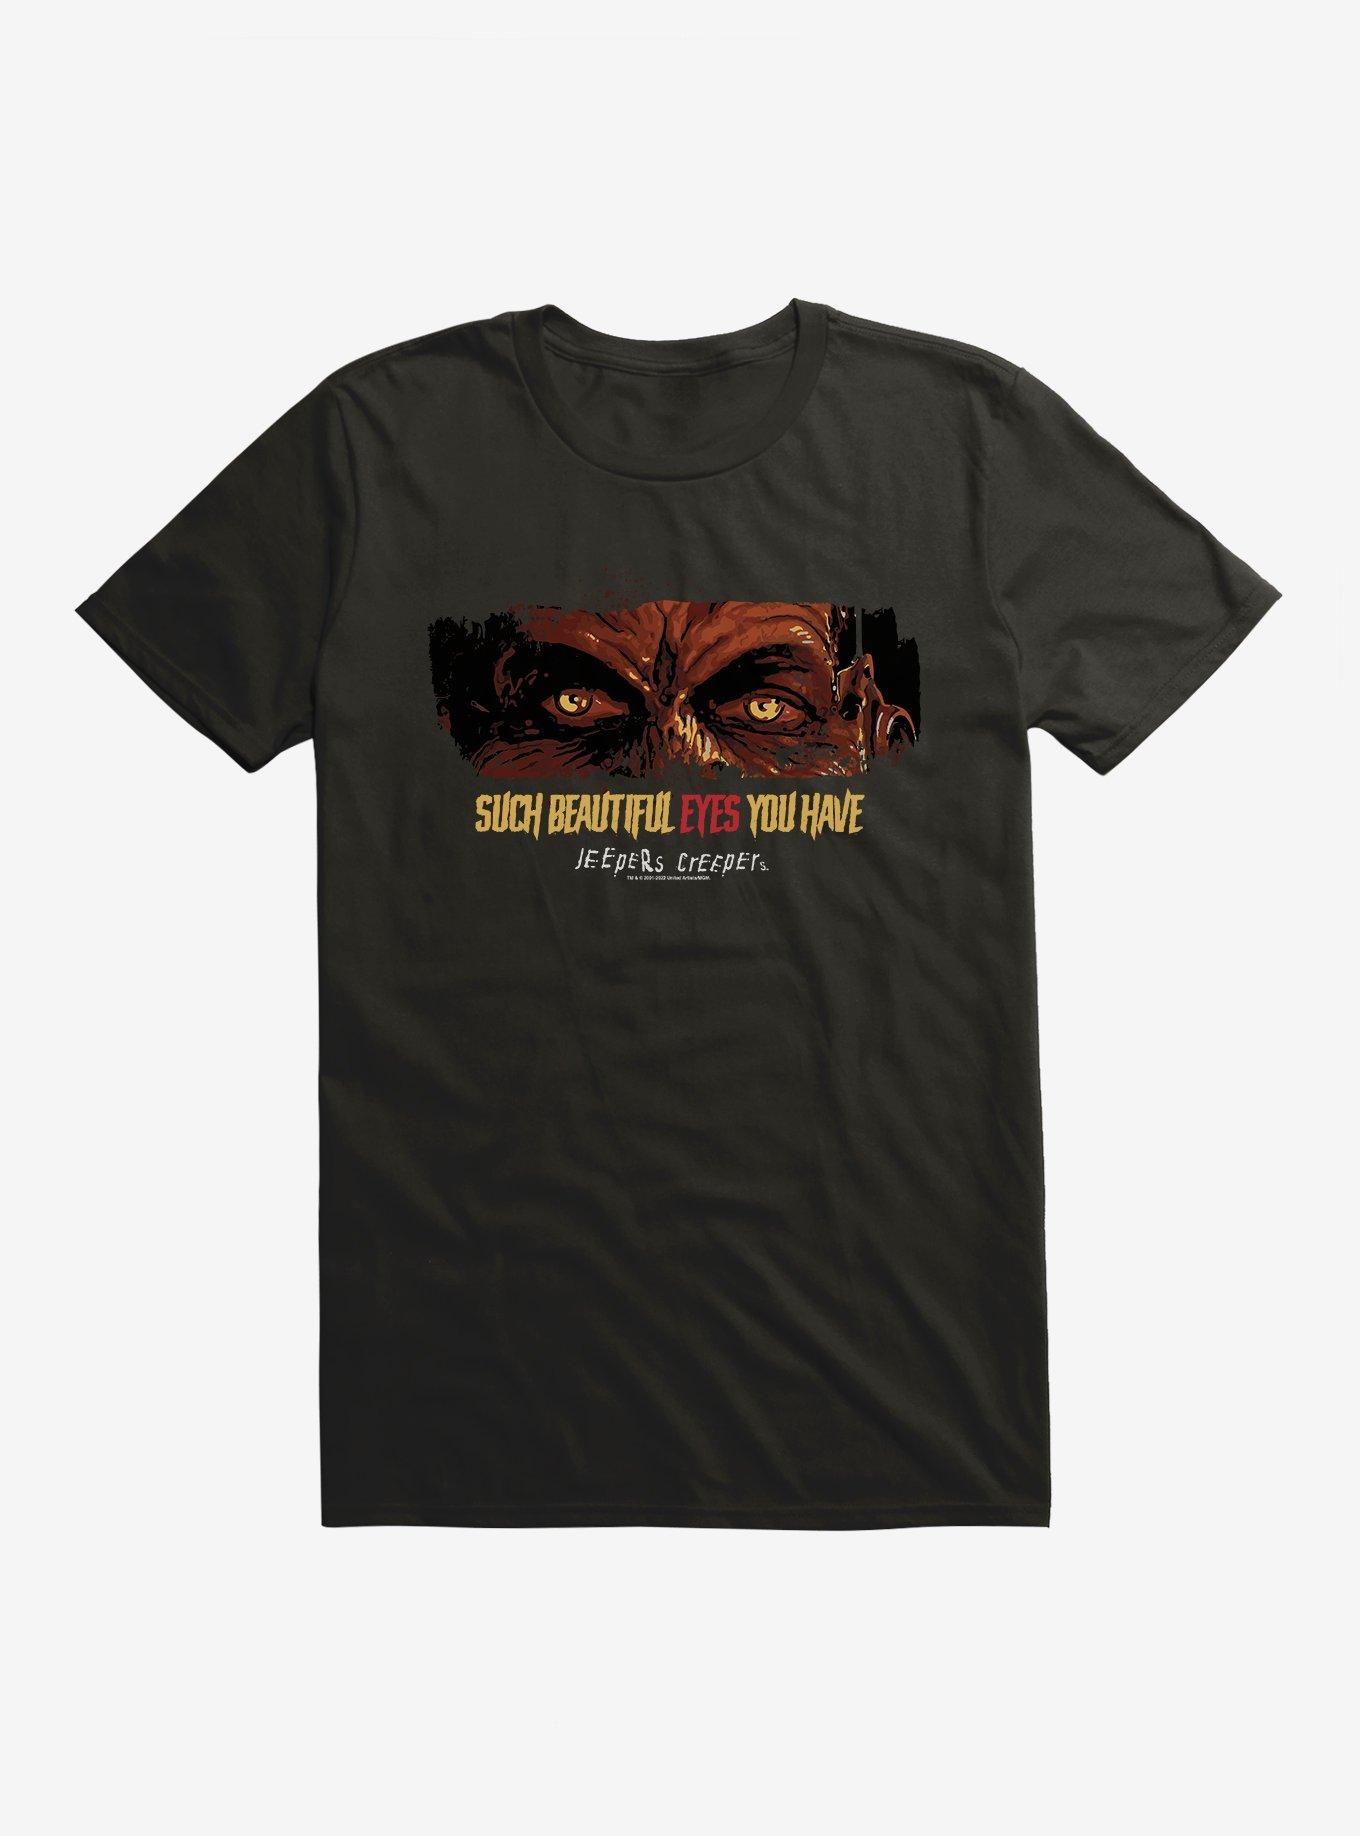 Jeepers Creepers Beautiful Eyes T-Shirt, BLACK, hi-res